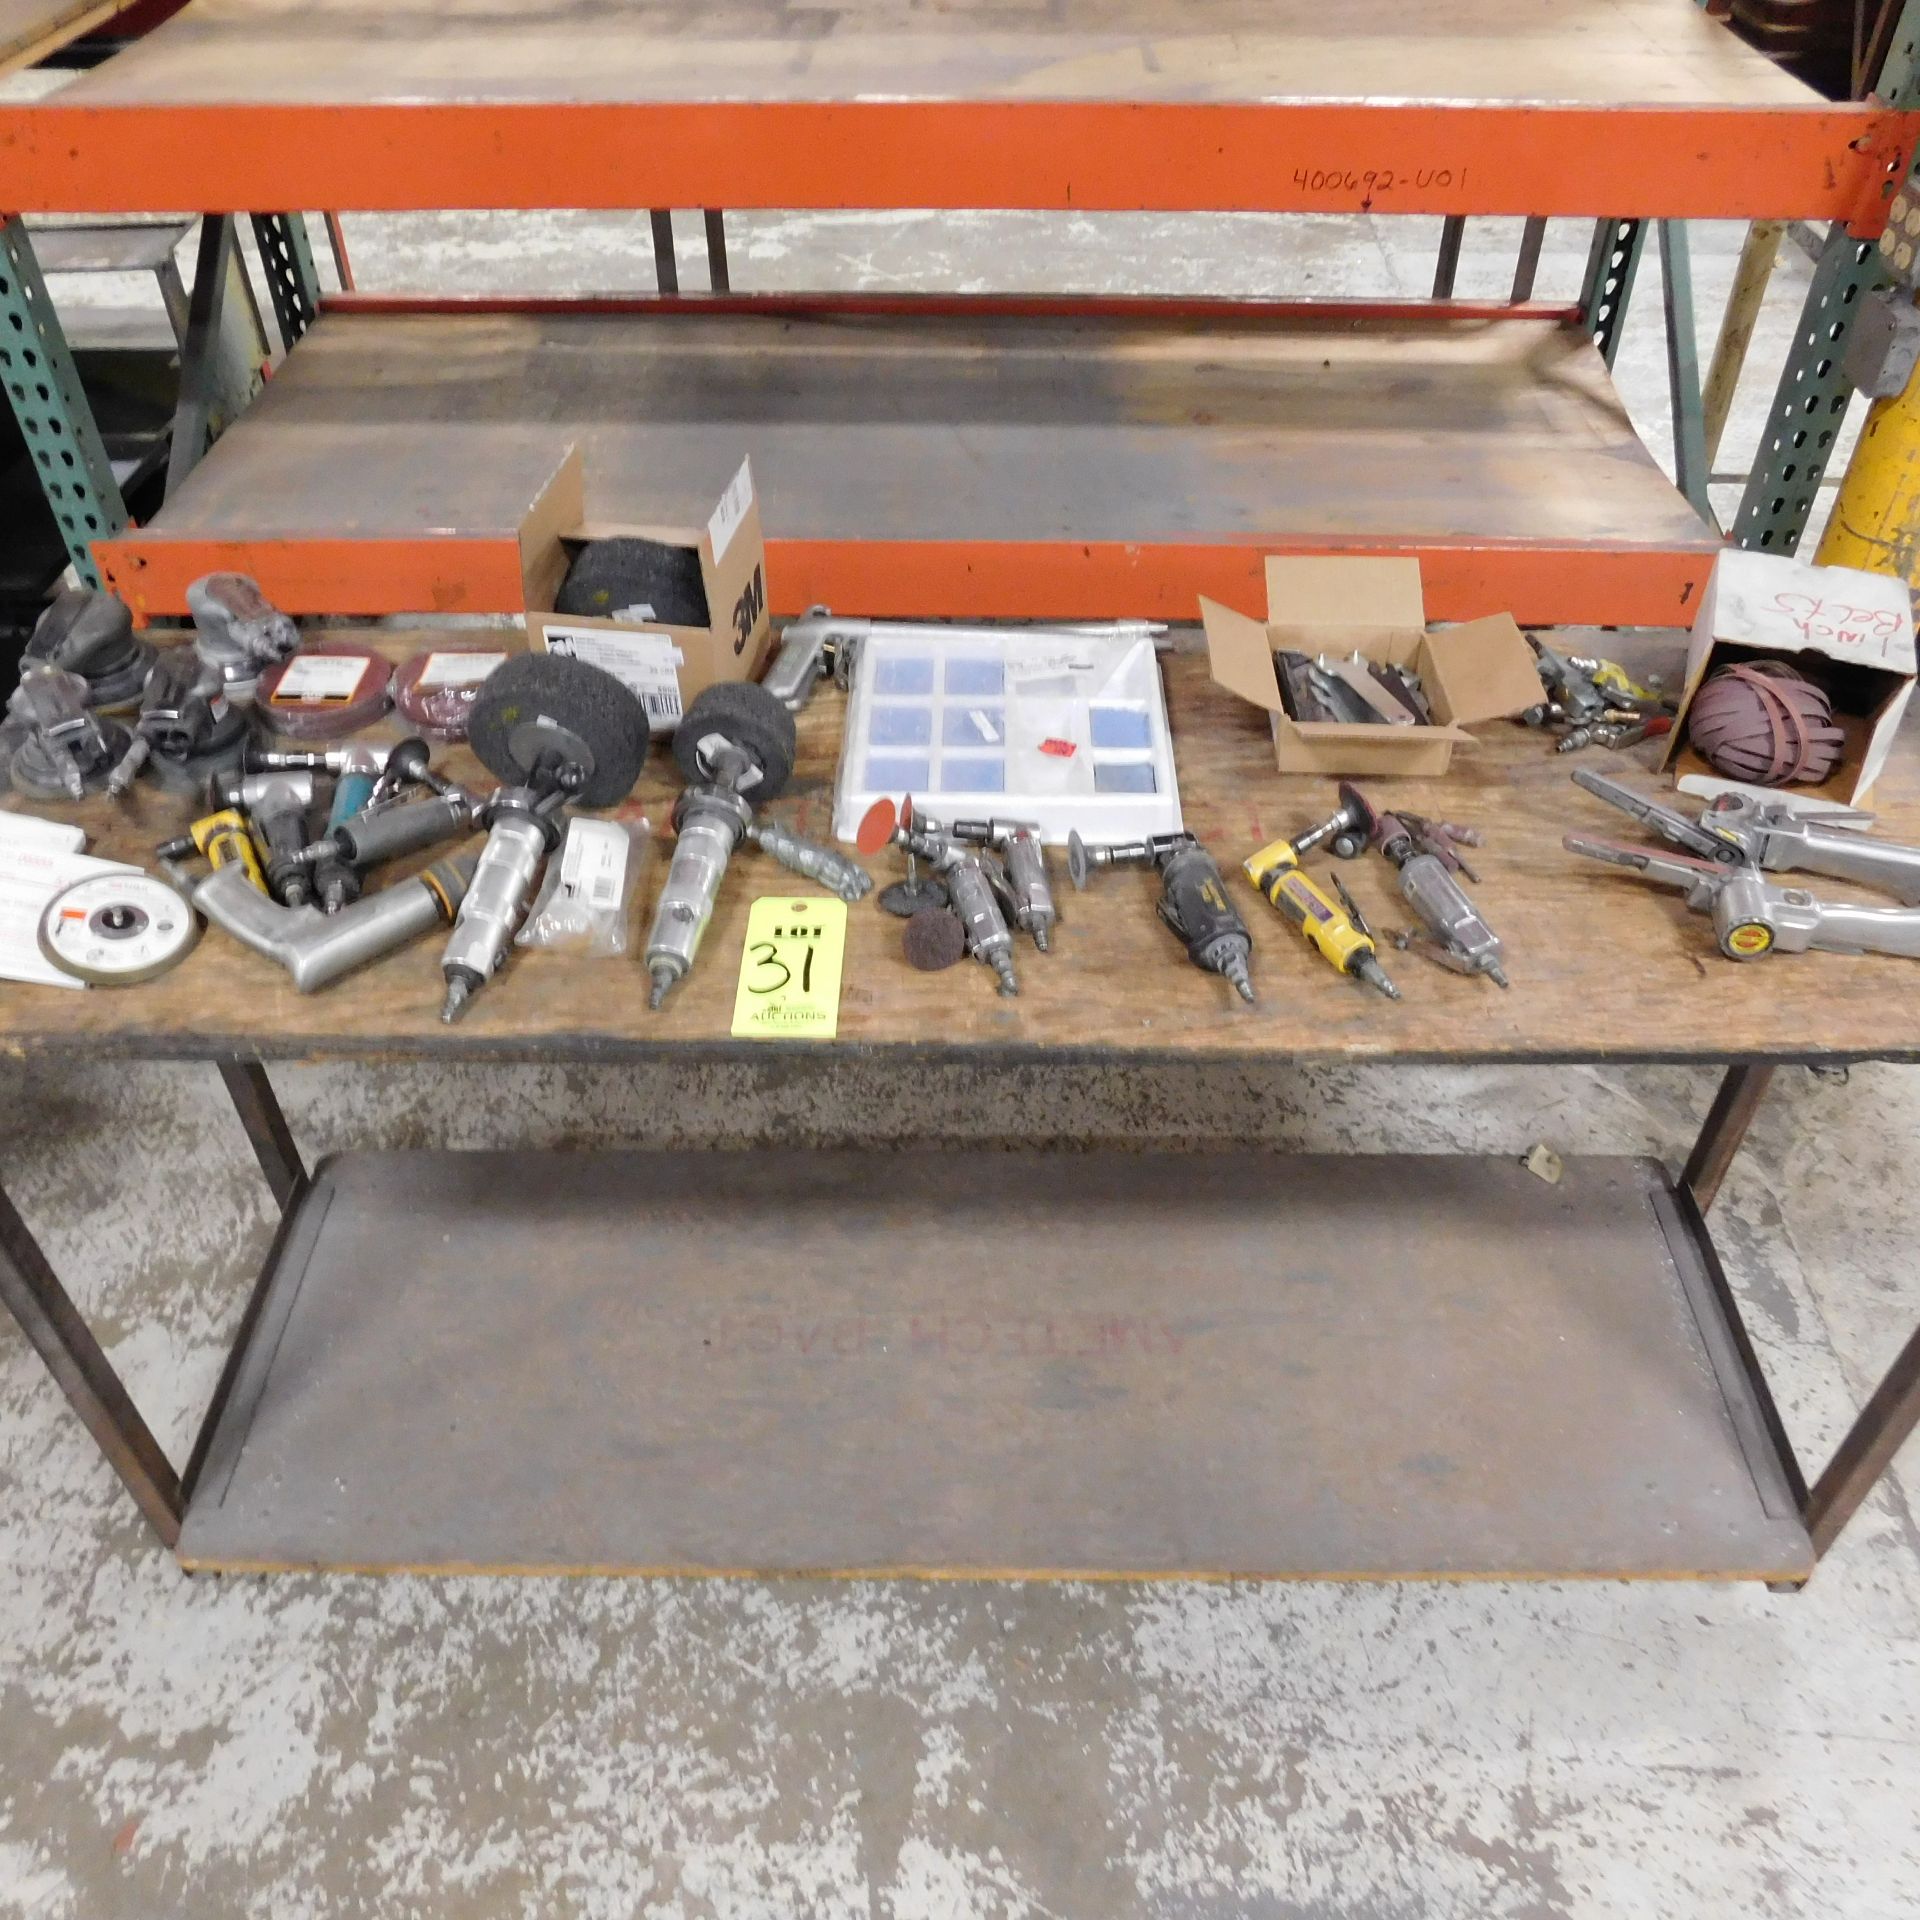 TABLE LOT OF PNEUMATIC GRINDING/FINISHING TOOLS & CONSUMABLES, W/ROLLING CART